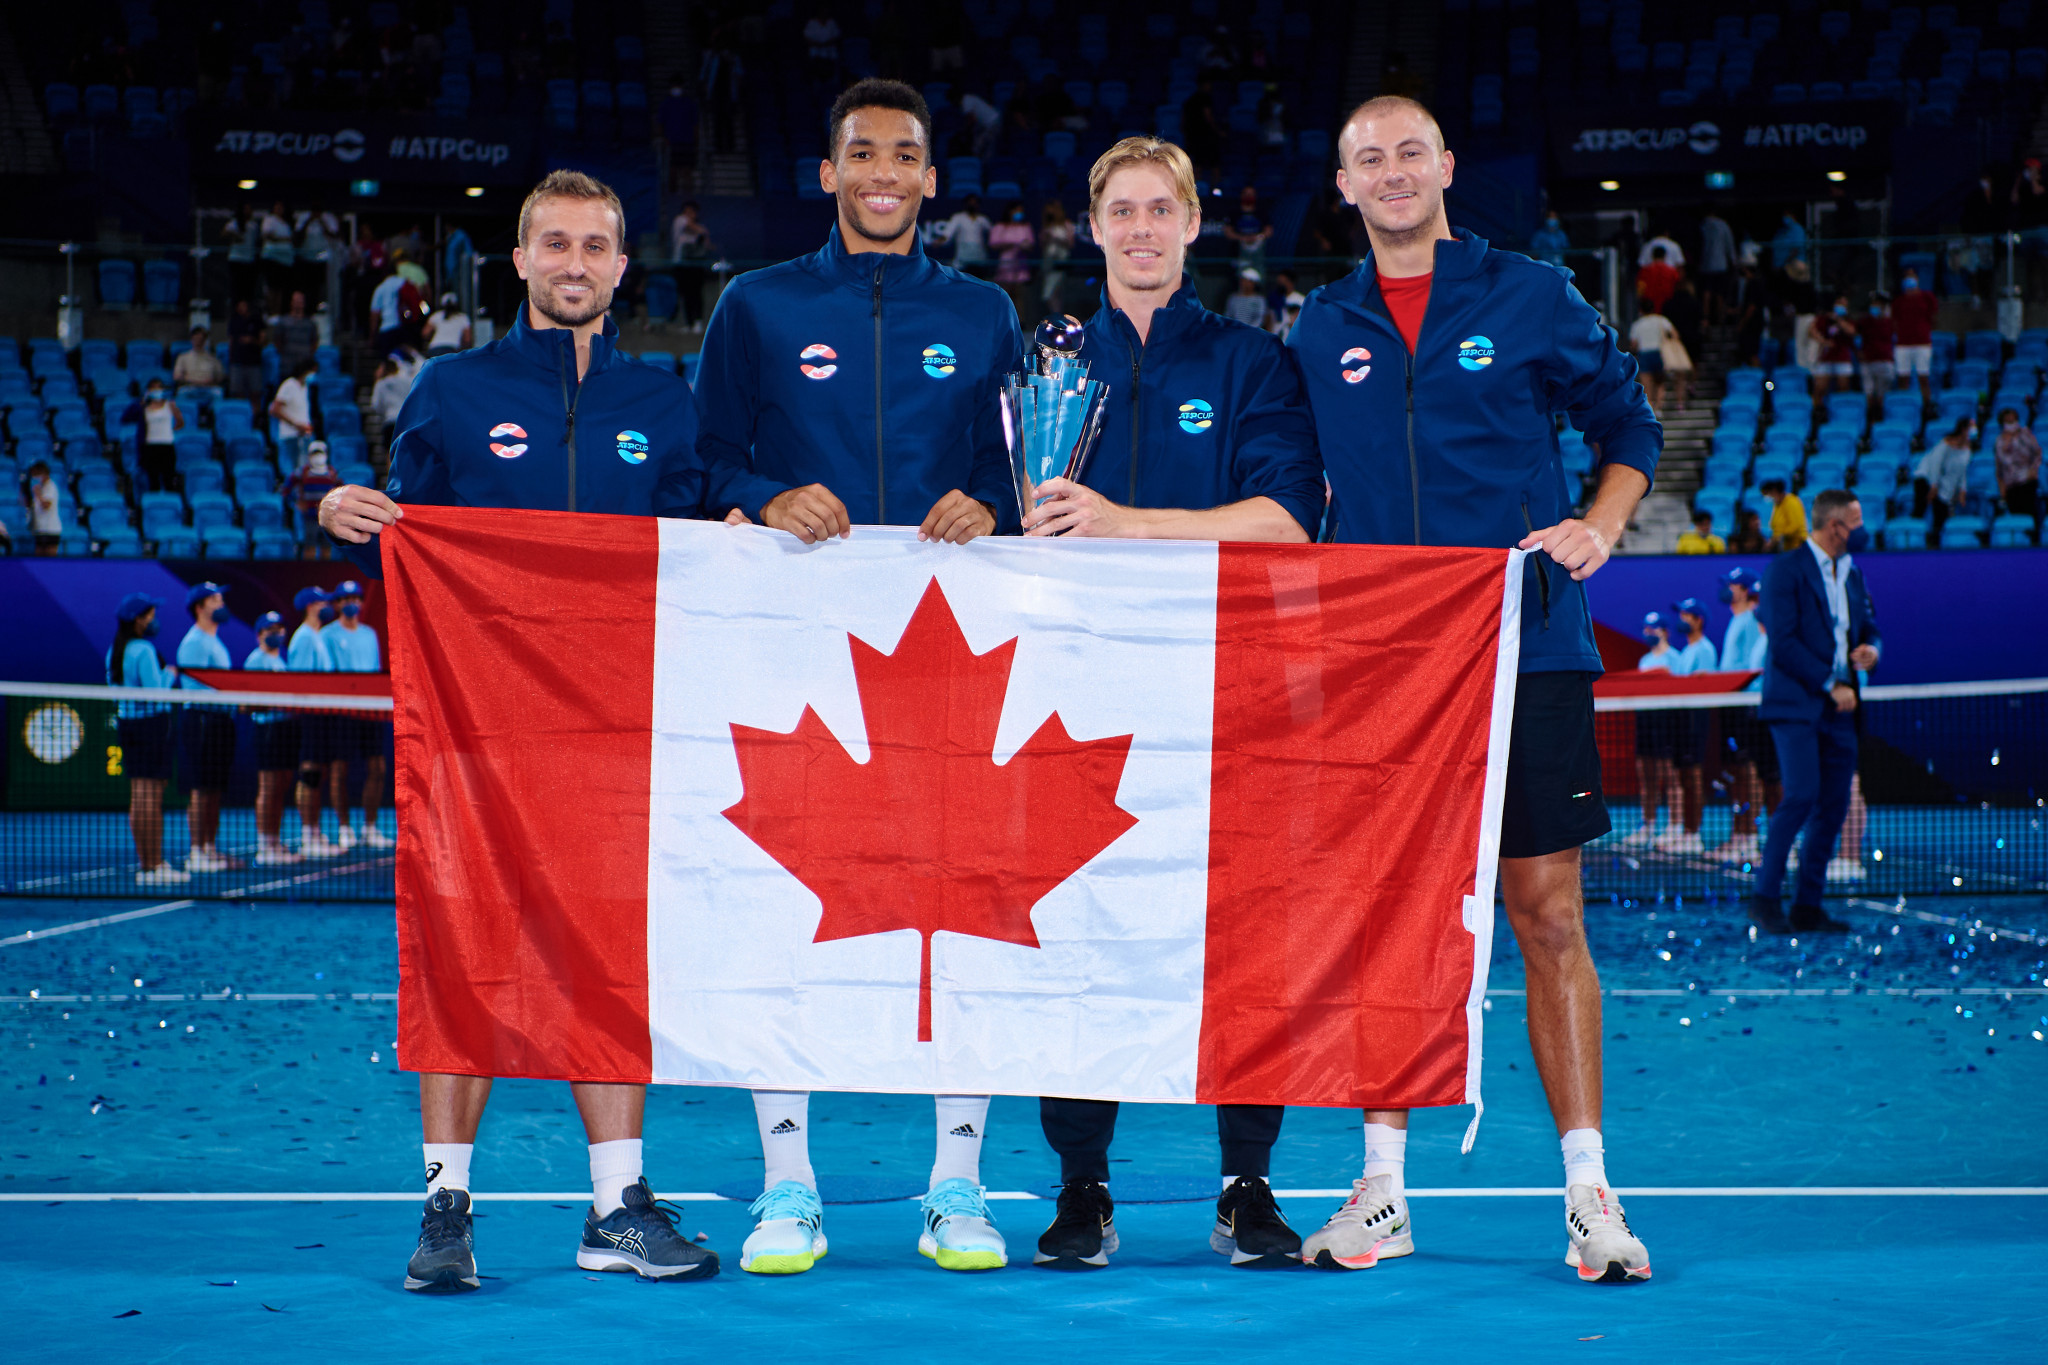 Auger-Aliassime and Shapovalov win in straight sets to clinch ATP Cup for Canada